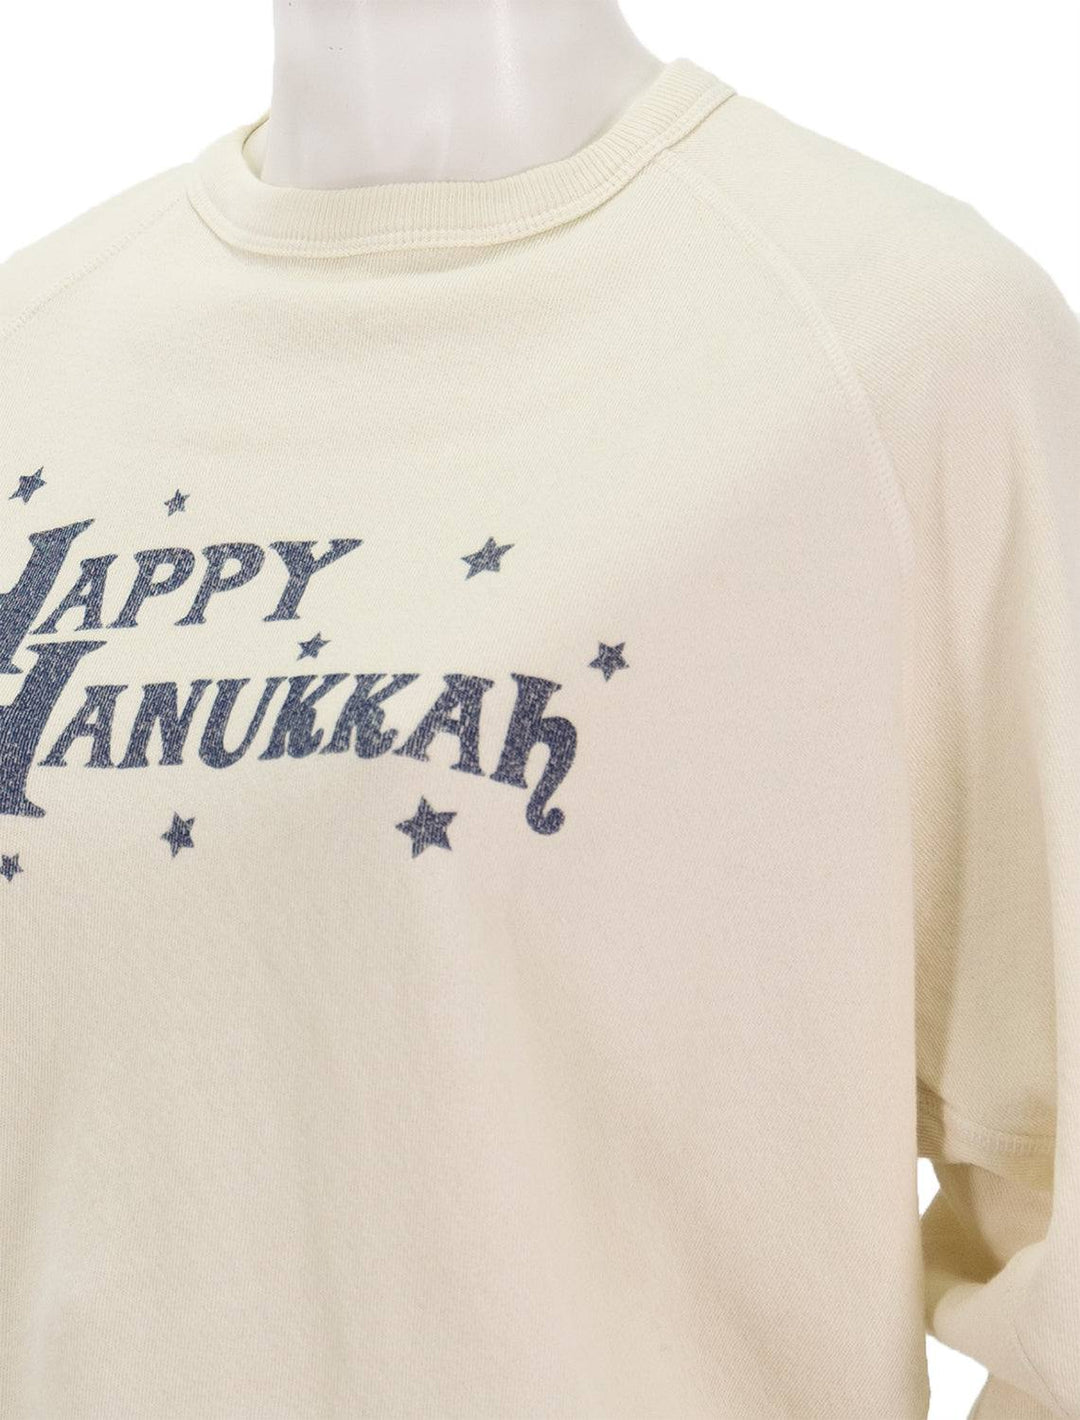 Close-up view of The Great's happy hanukkah college sweatshirt in washed white.